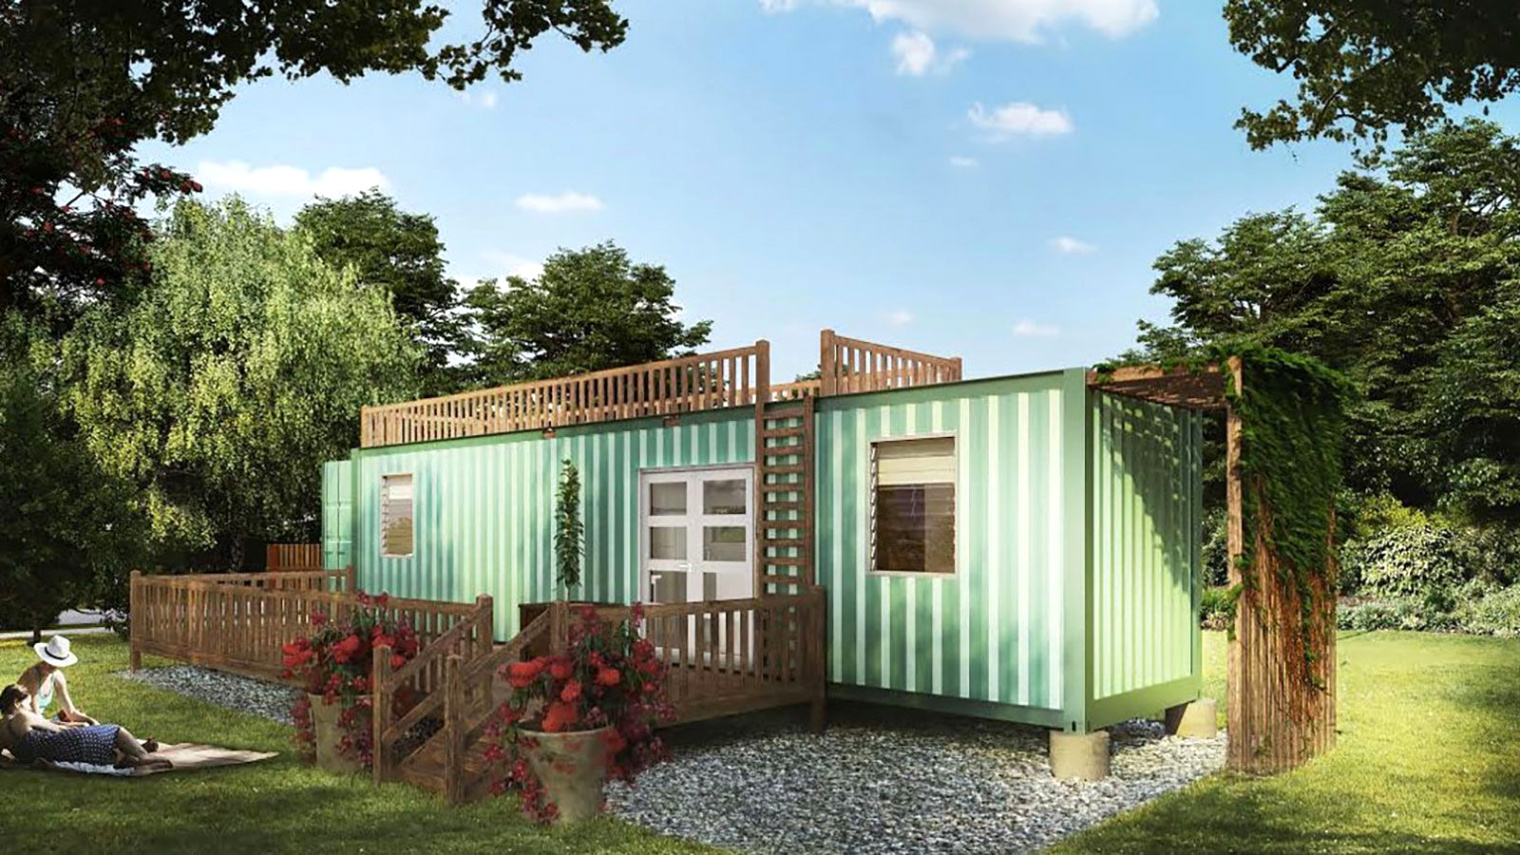 Personil Injury Lawyer In Naguabo Pr Dans Architect's Innovative Shipping Container Homes Could Help solve ...